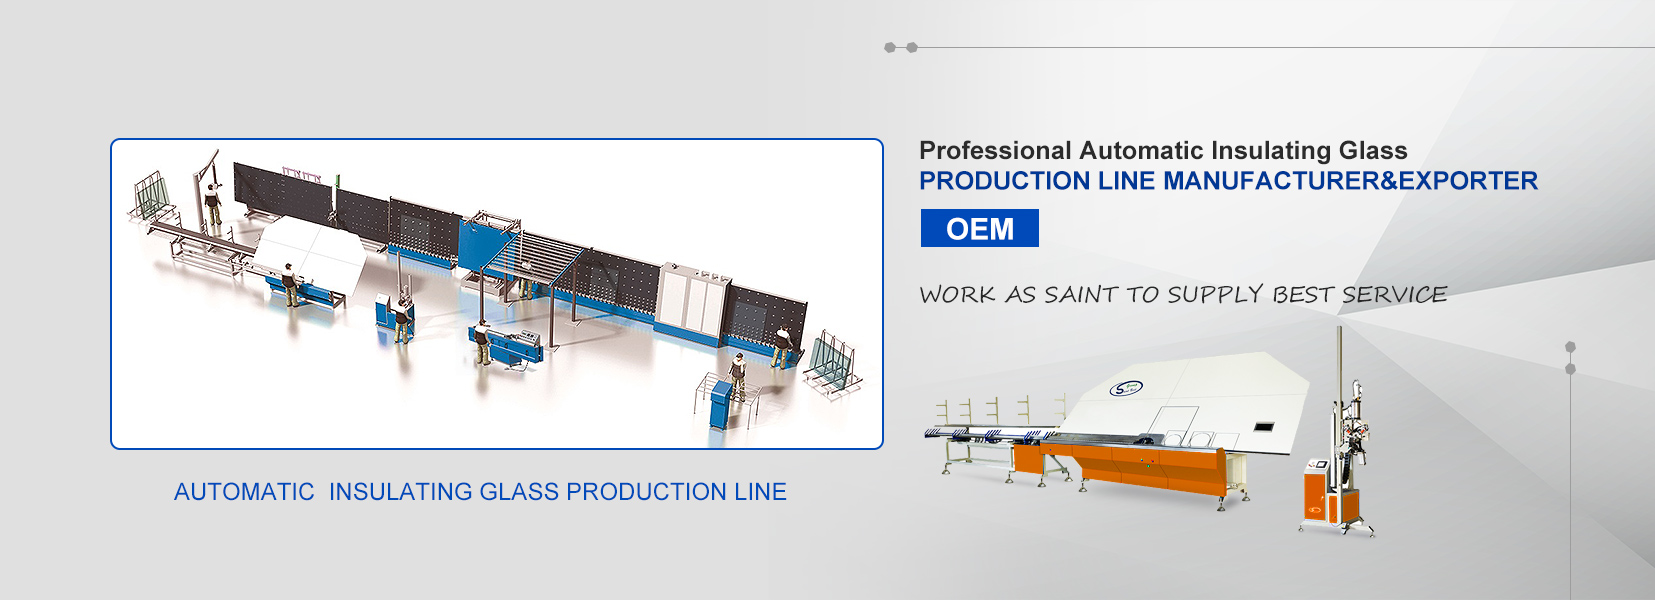 Professional Automatic Insulating Glass  Production Line Manufacturer&Exporter